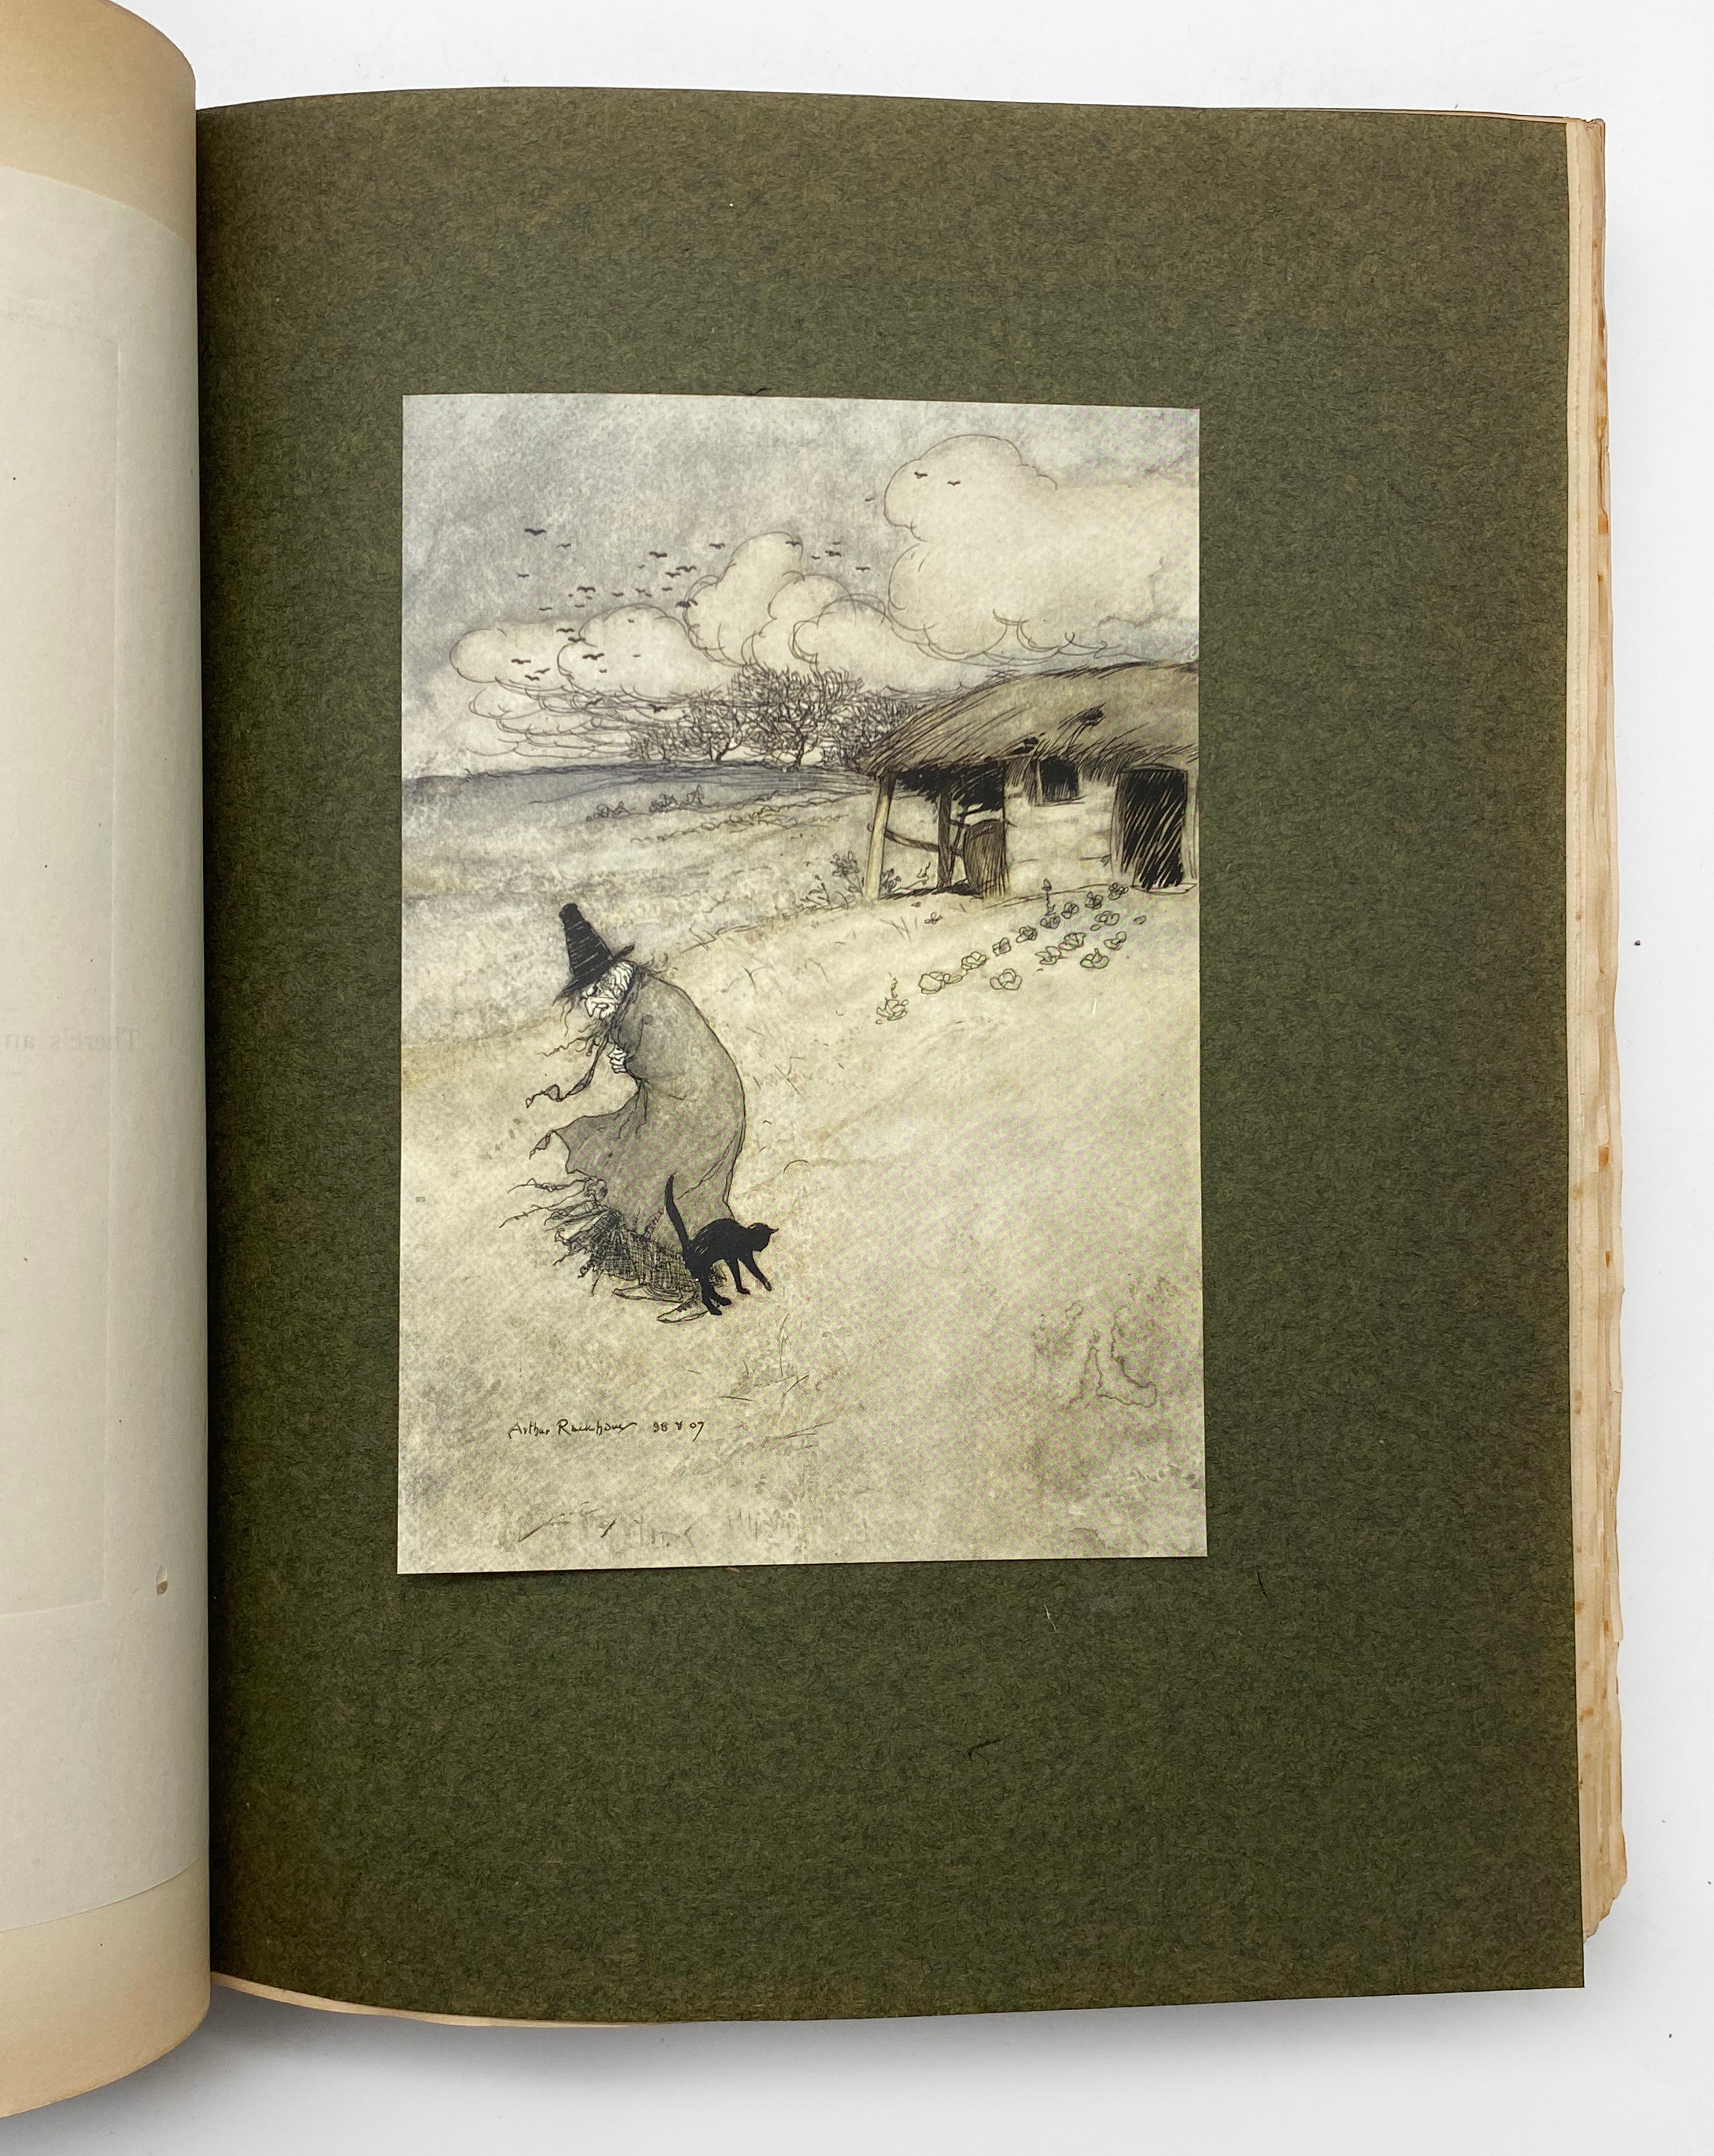 THE INGOLDSBY LEGENDS ILLUSTRATED BY ARTHUR RACKHAM LIMITED EDITION 1907 - Image 5 of 6